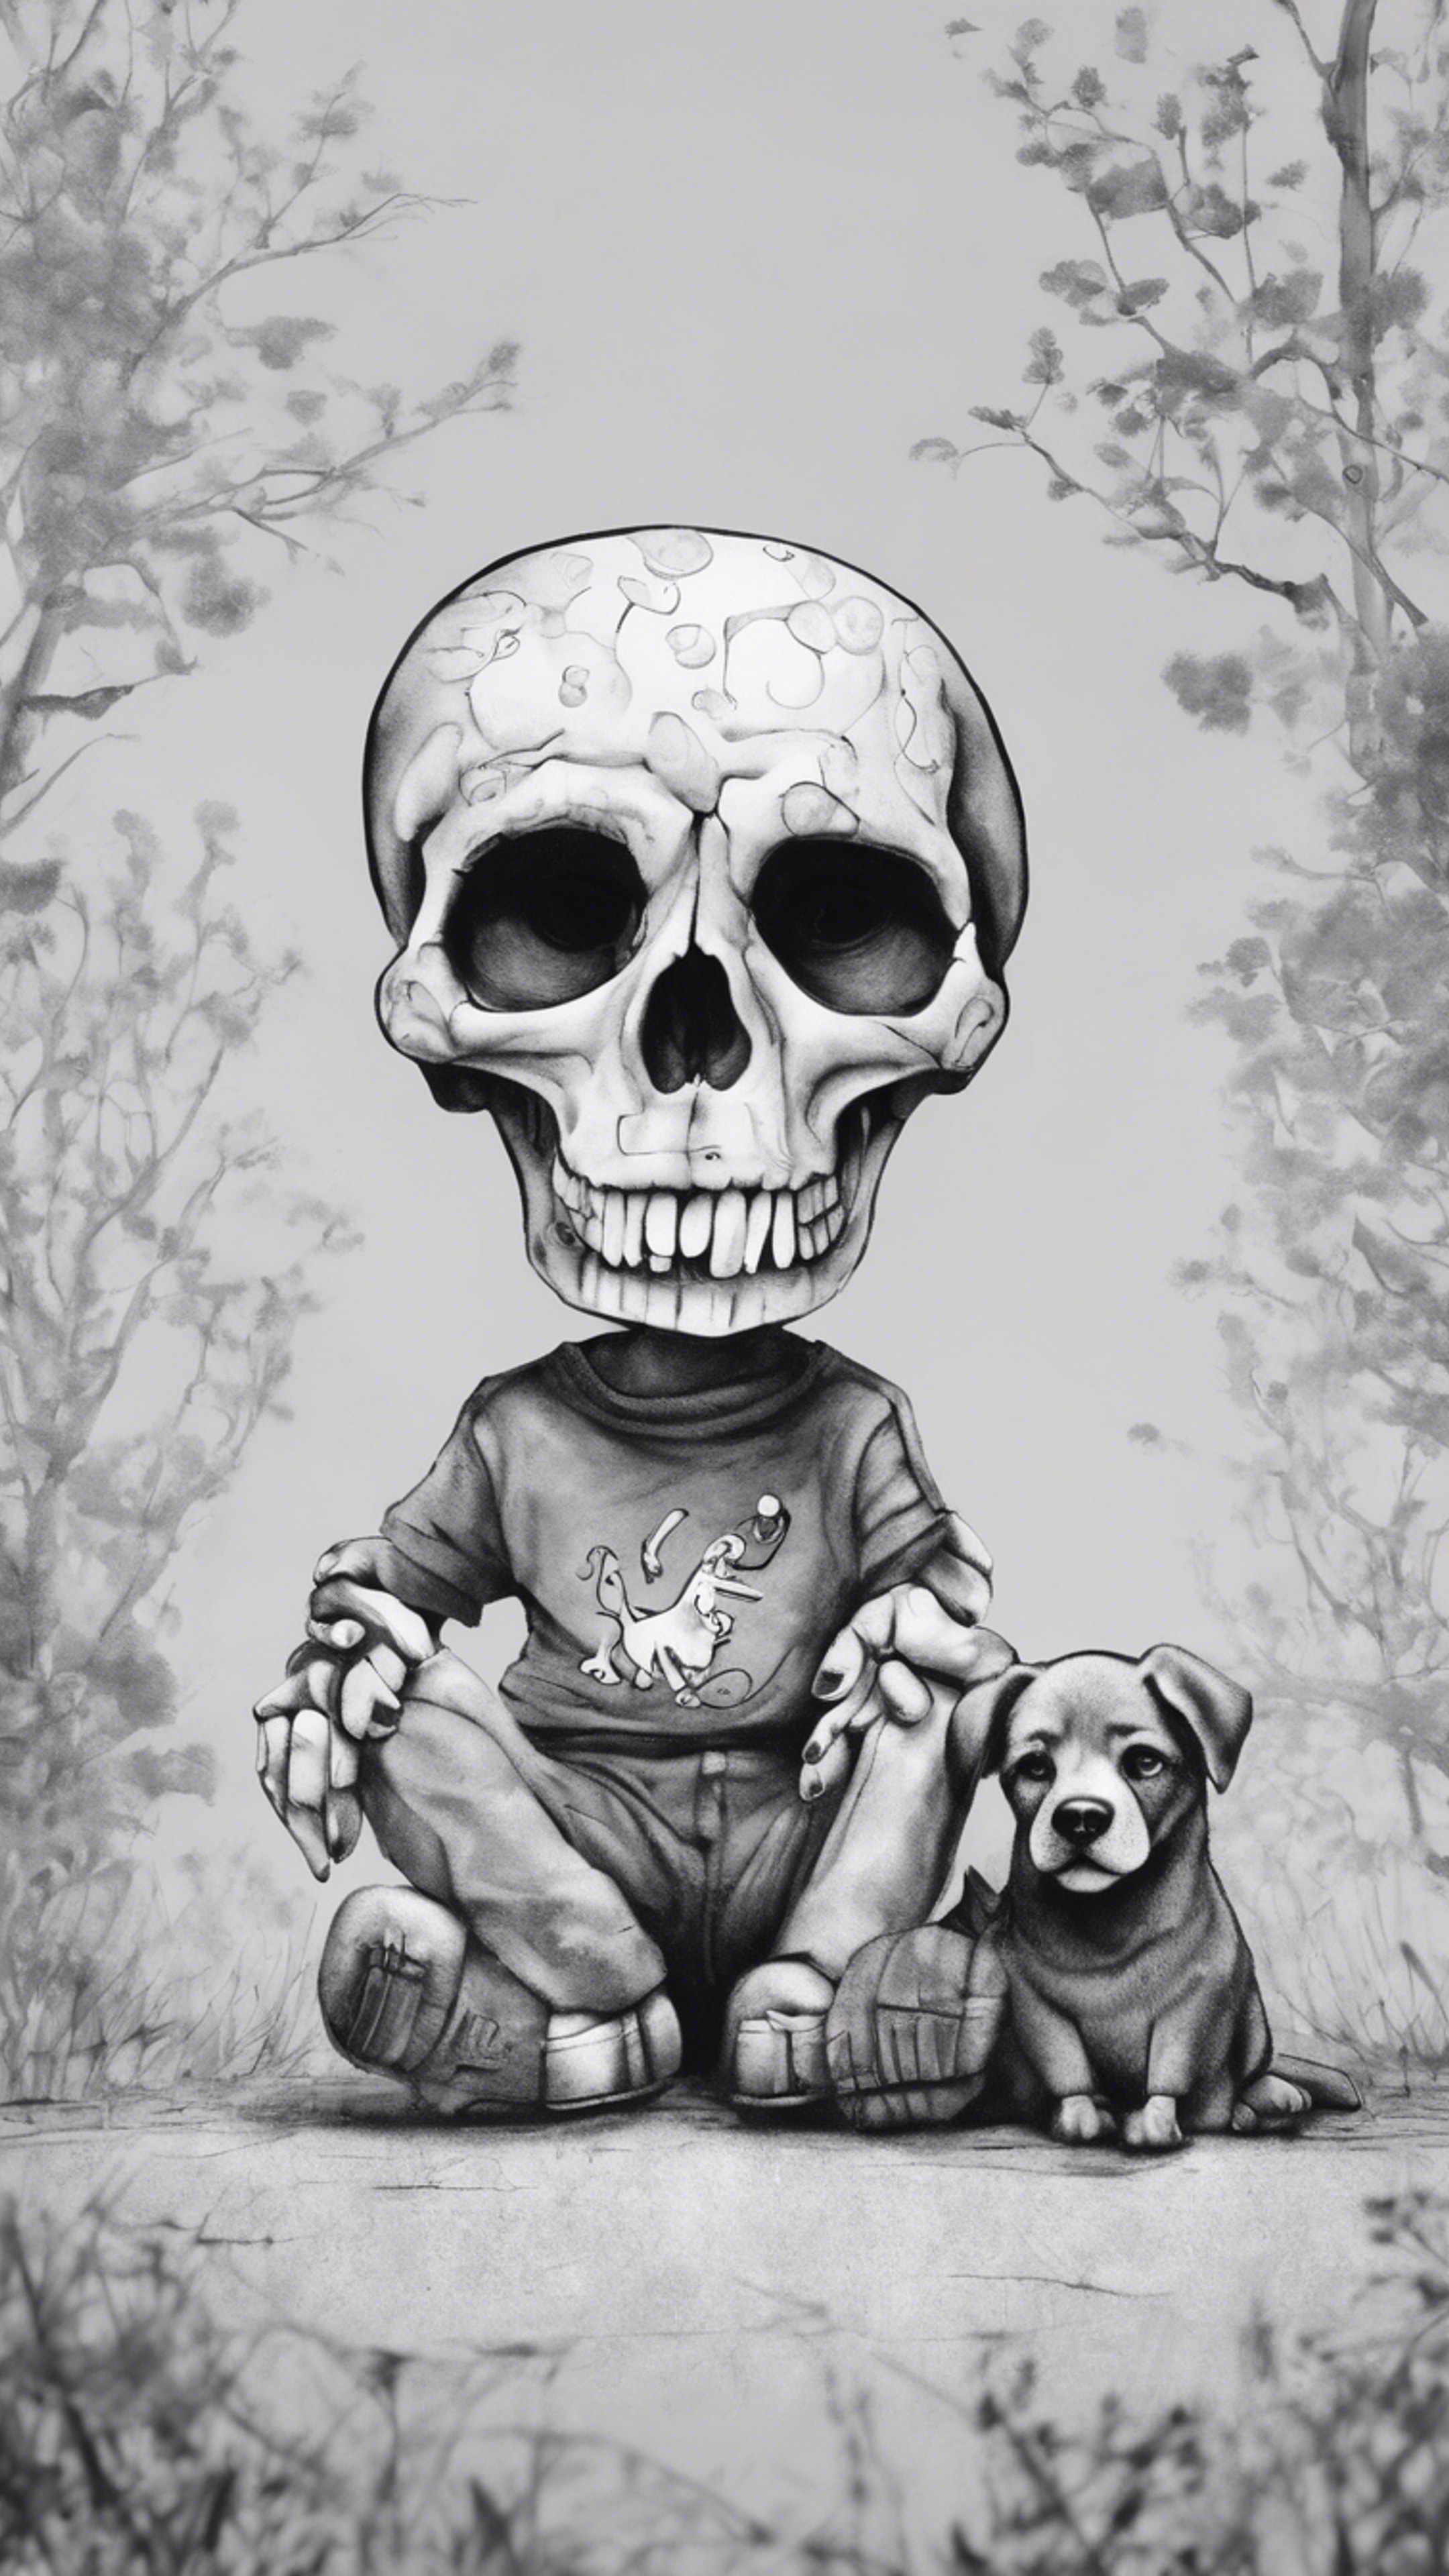 An imaginative kid's drawing of a funny, gray skull playing with a friendly dog.壁紙[5ca67c6f78044dd1bd79]